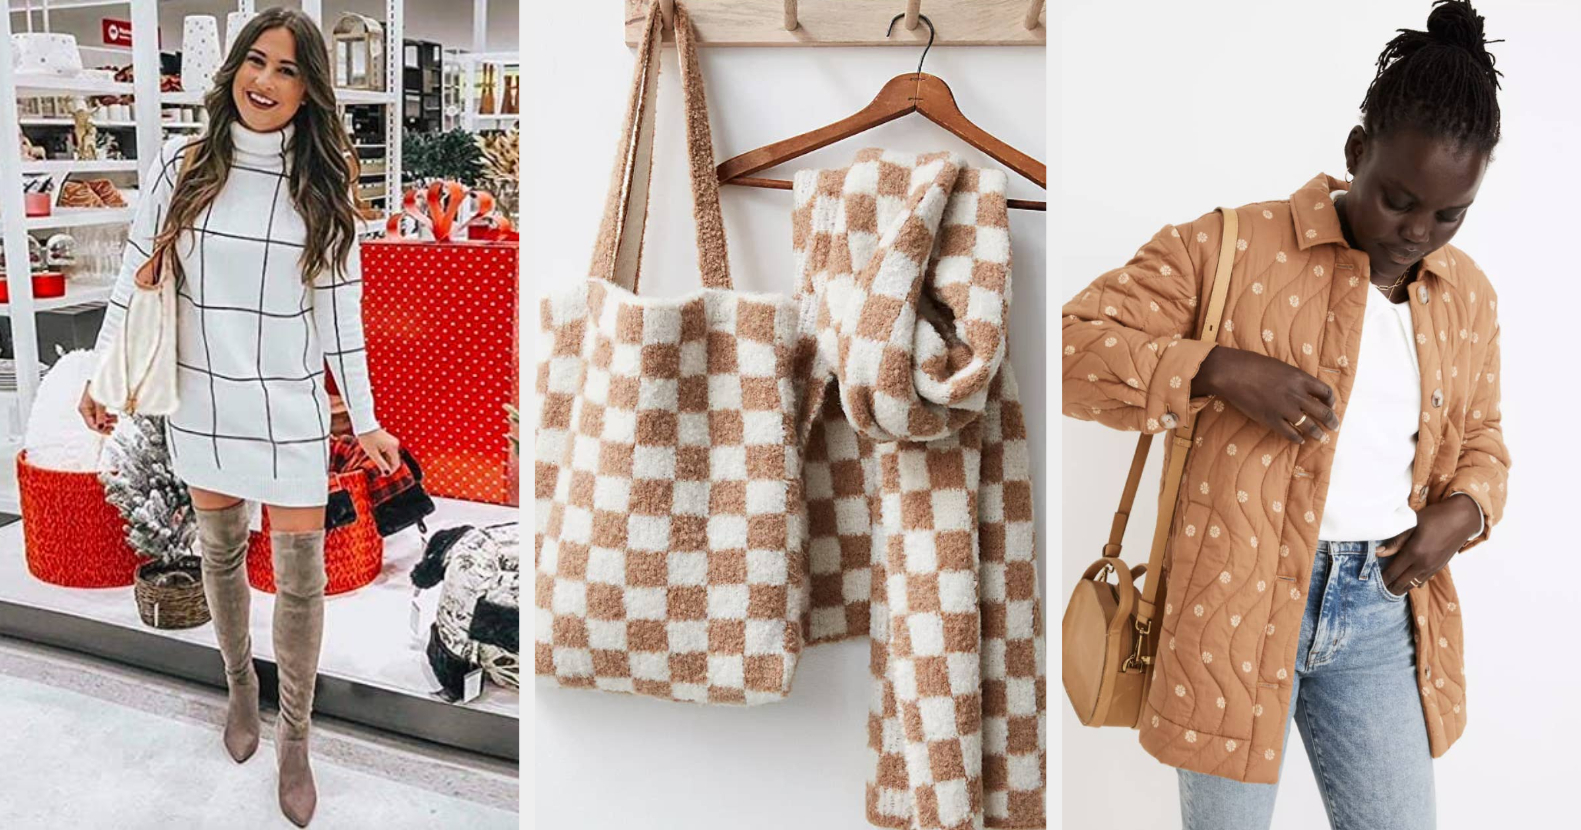 teddy bear coat neverfull louis vuitton outfit 201910